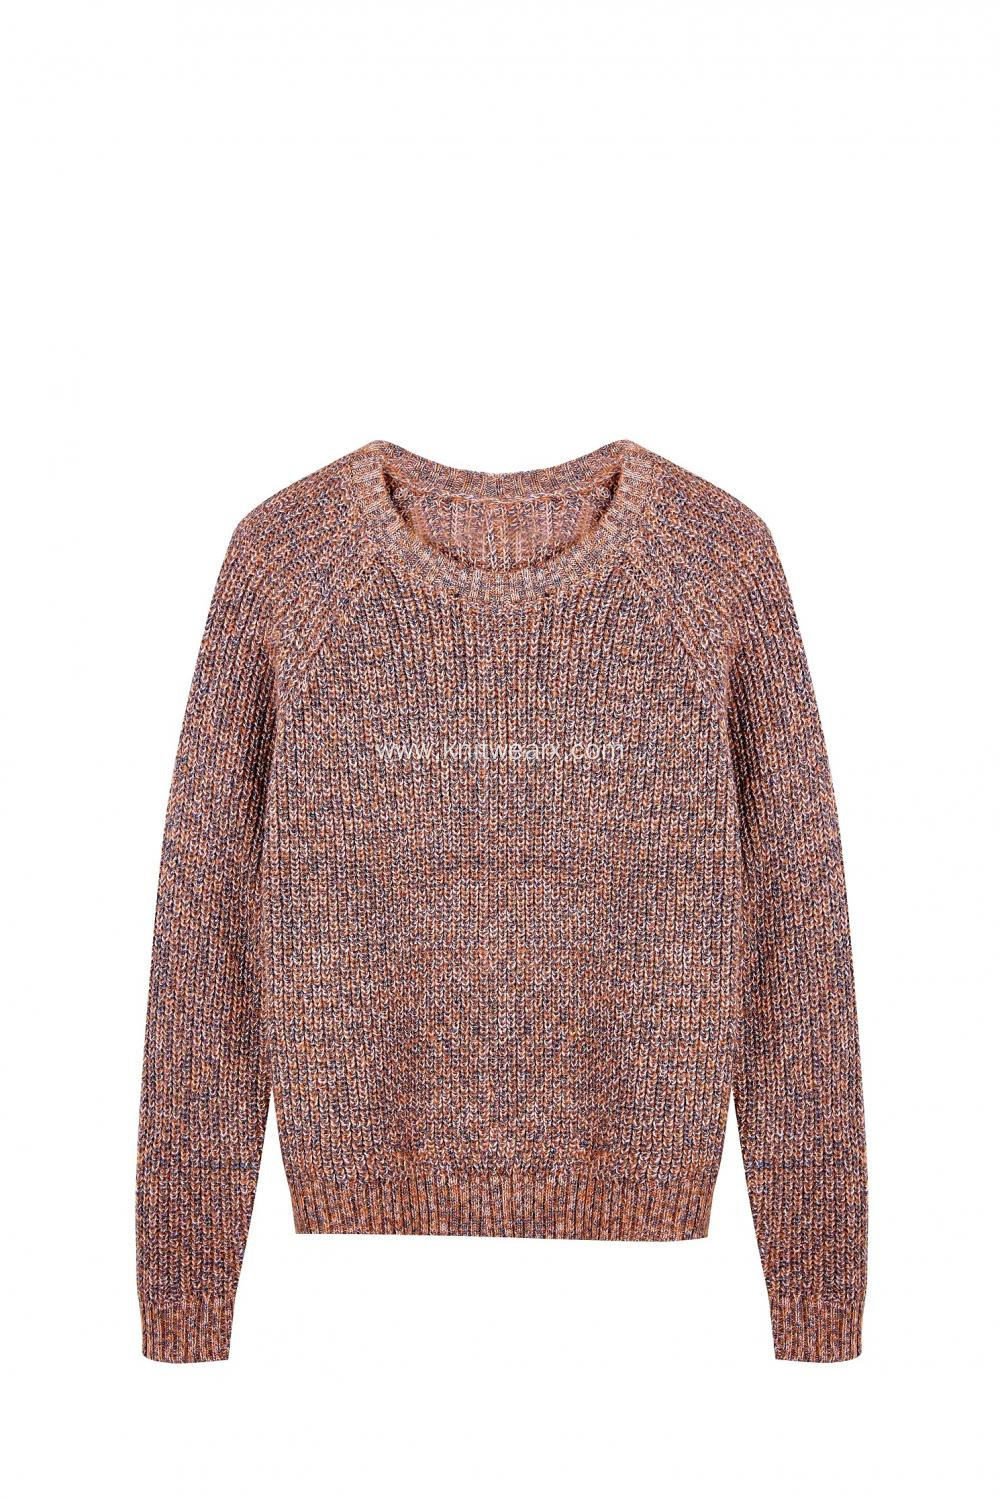 Women's Knitted Fancy Crew-Neck Chunky Pullover